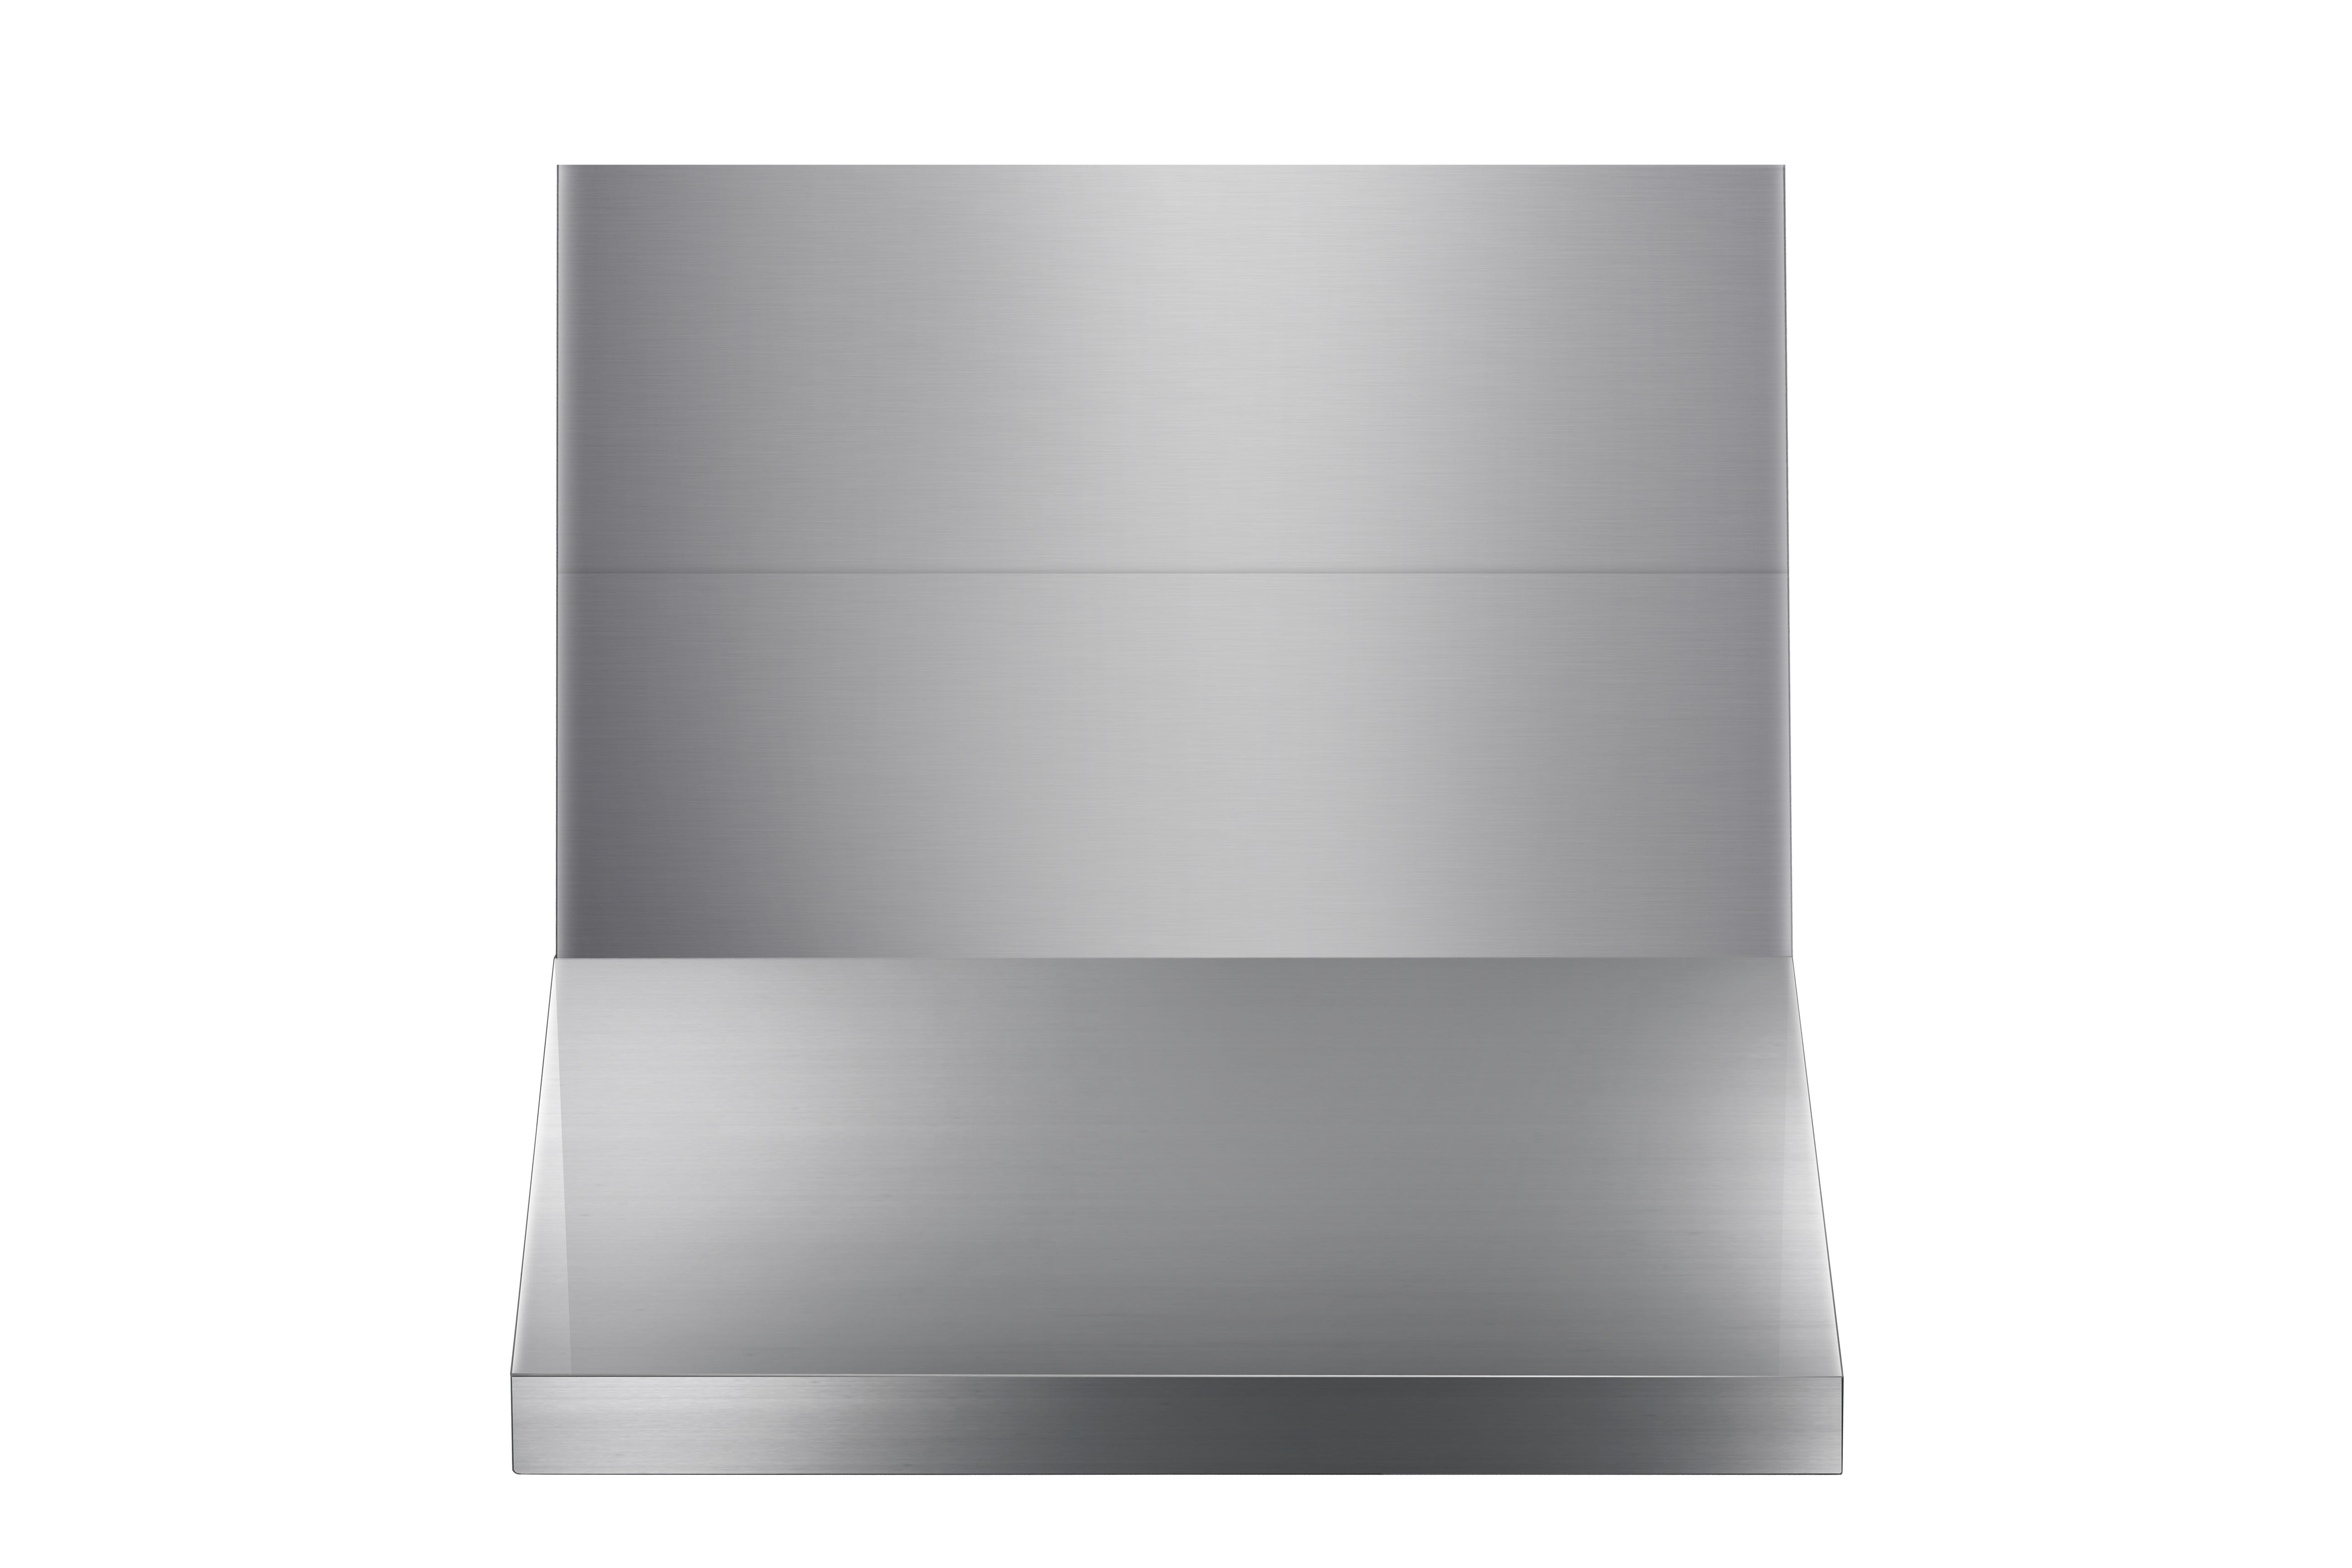 TRH4805-R (Renewed) Thor Kitchen 48 Inch Professional Range Hood, 16.5 Inches Tall in Stainless Steel